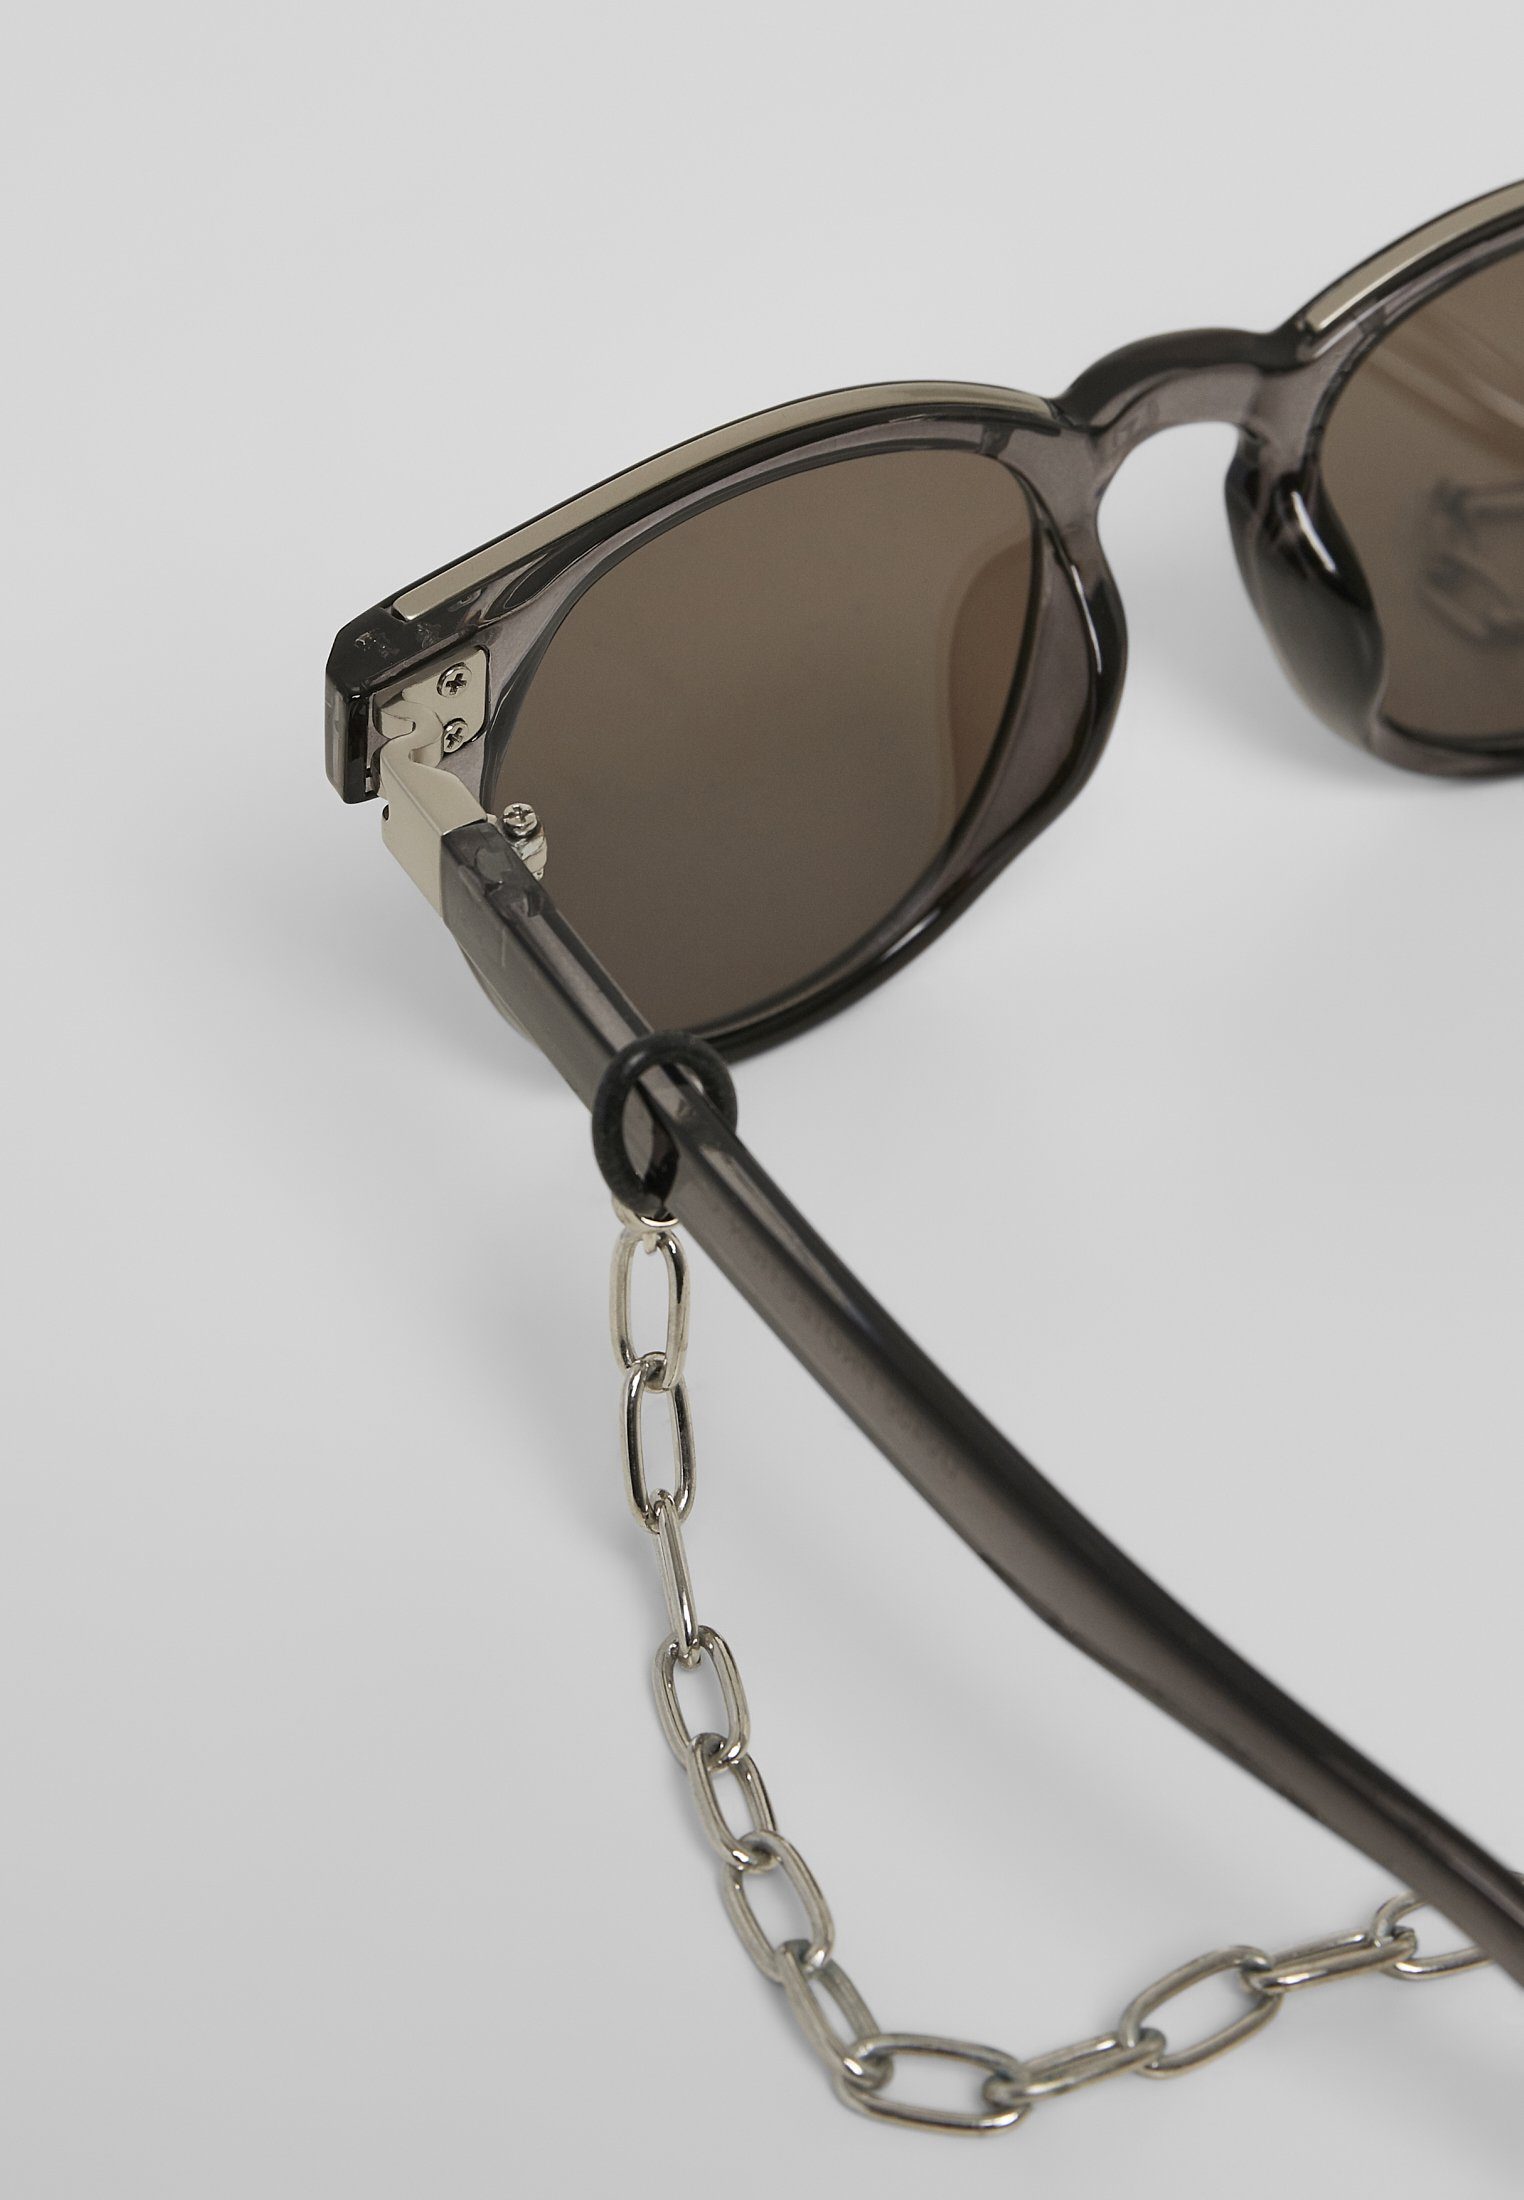 grey/silver/silver chain Sunglasses with Unisex Sonnenbrille CLASSICS Italy URBAN